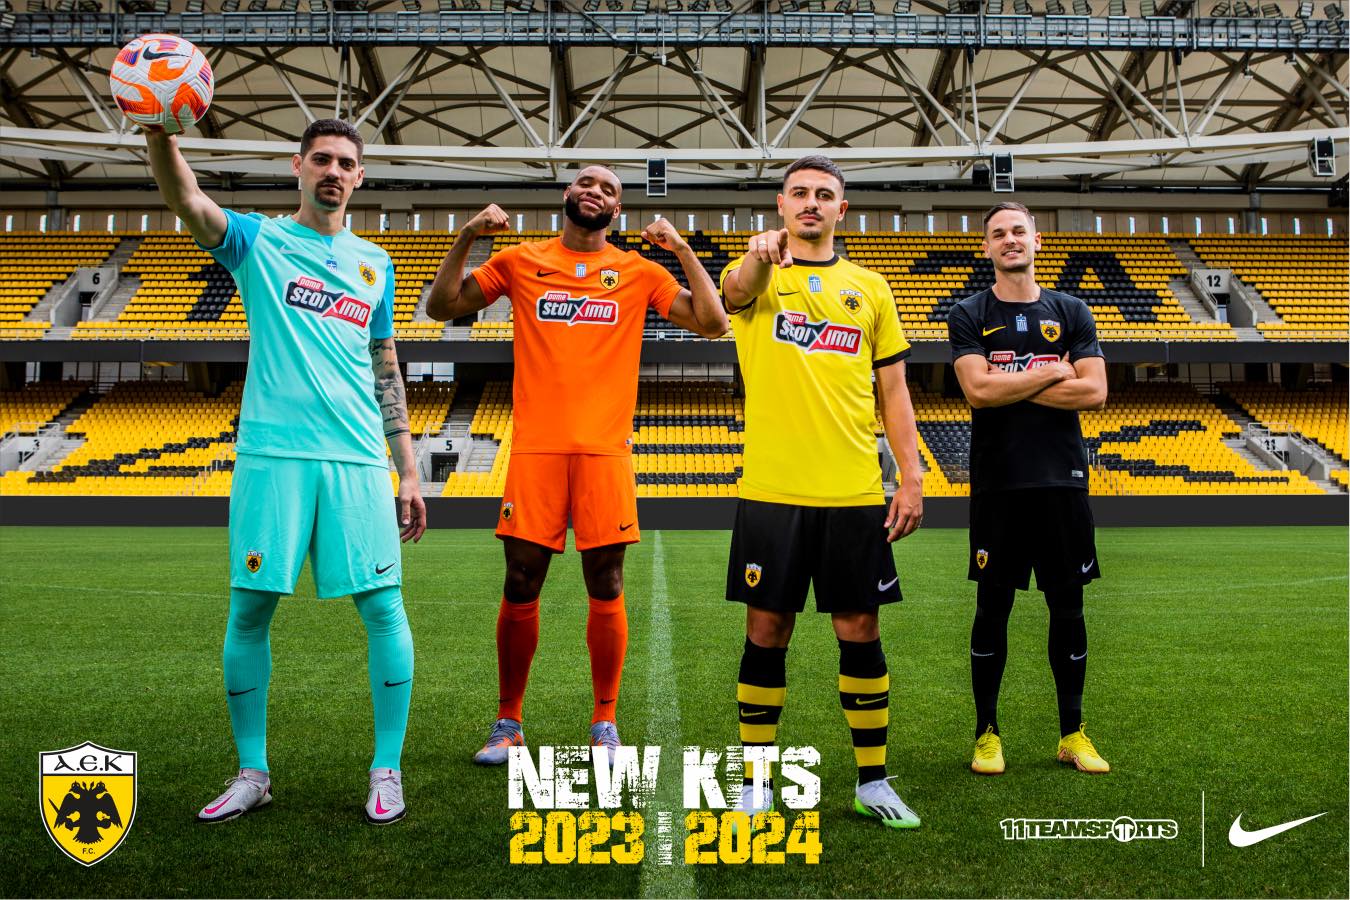 AEK BC presents new shirts for the Centenary season in the